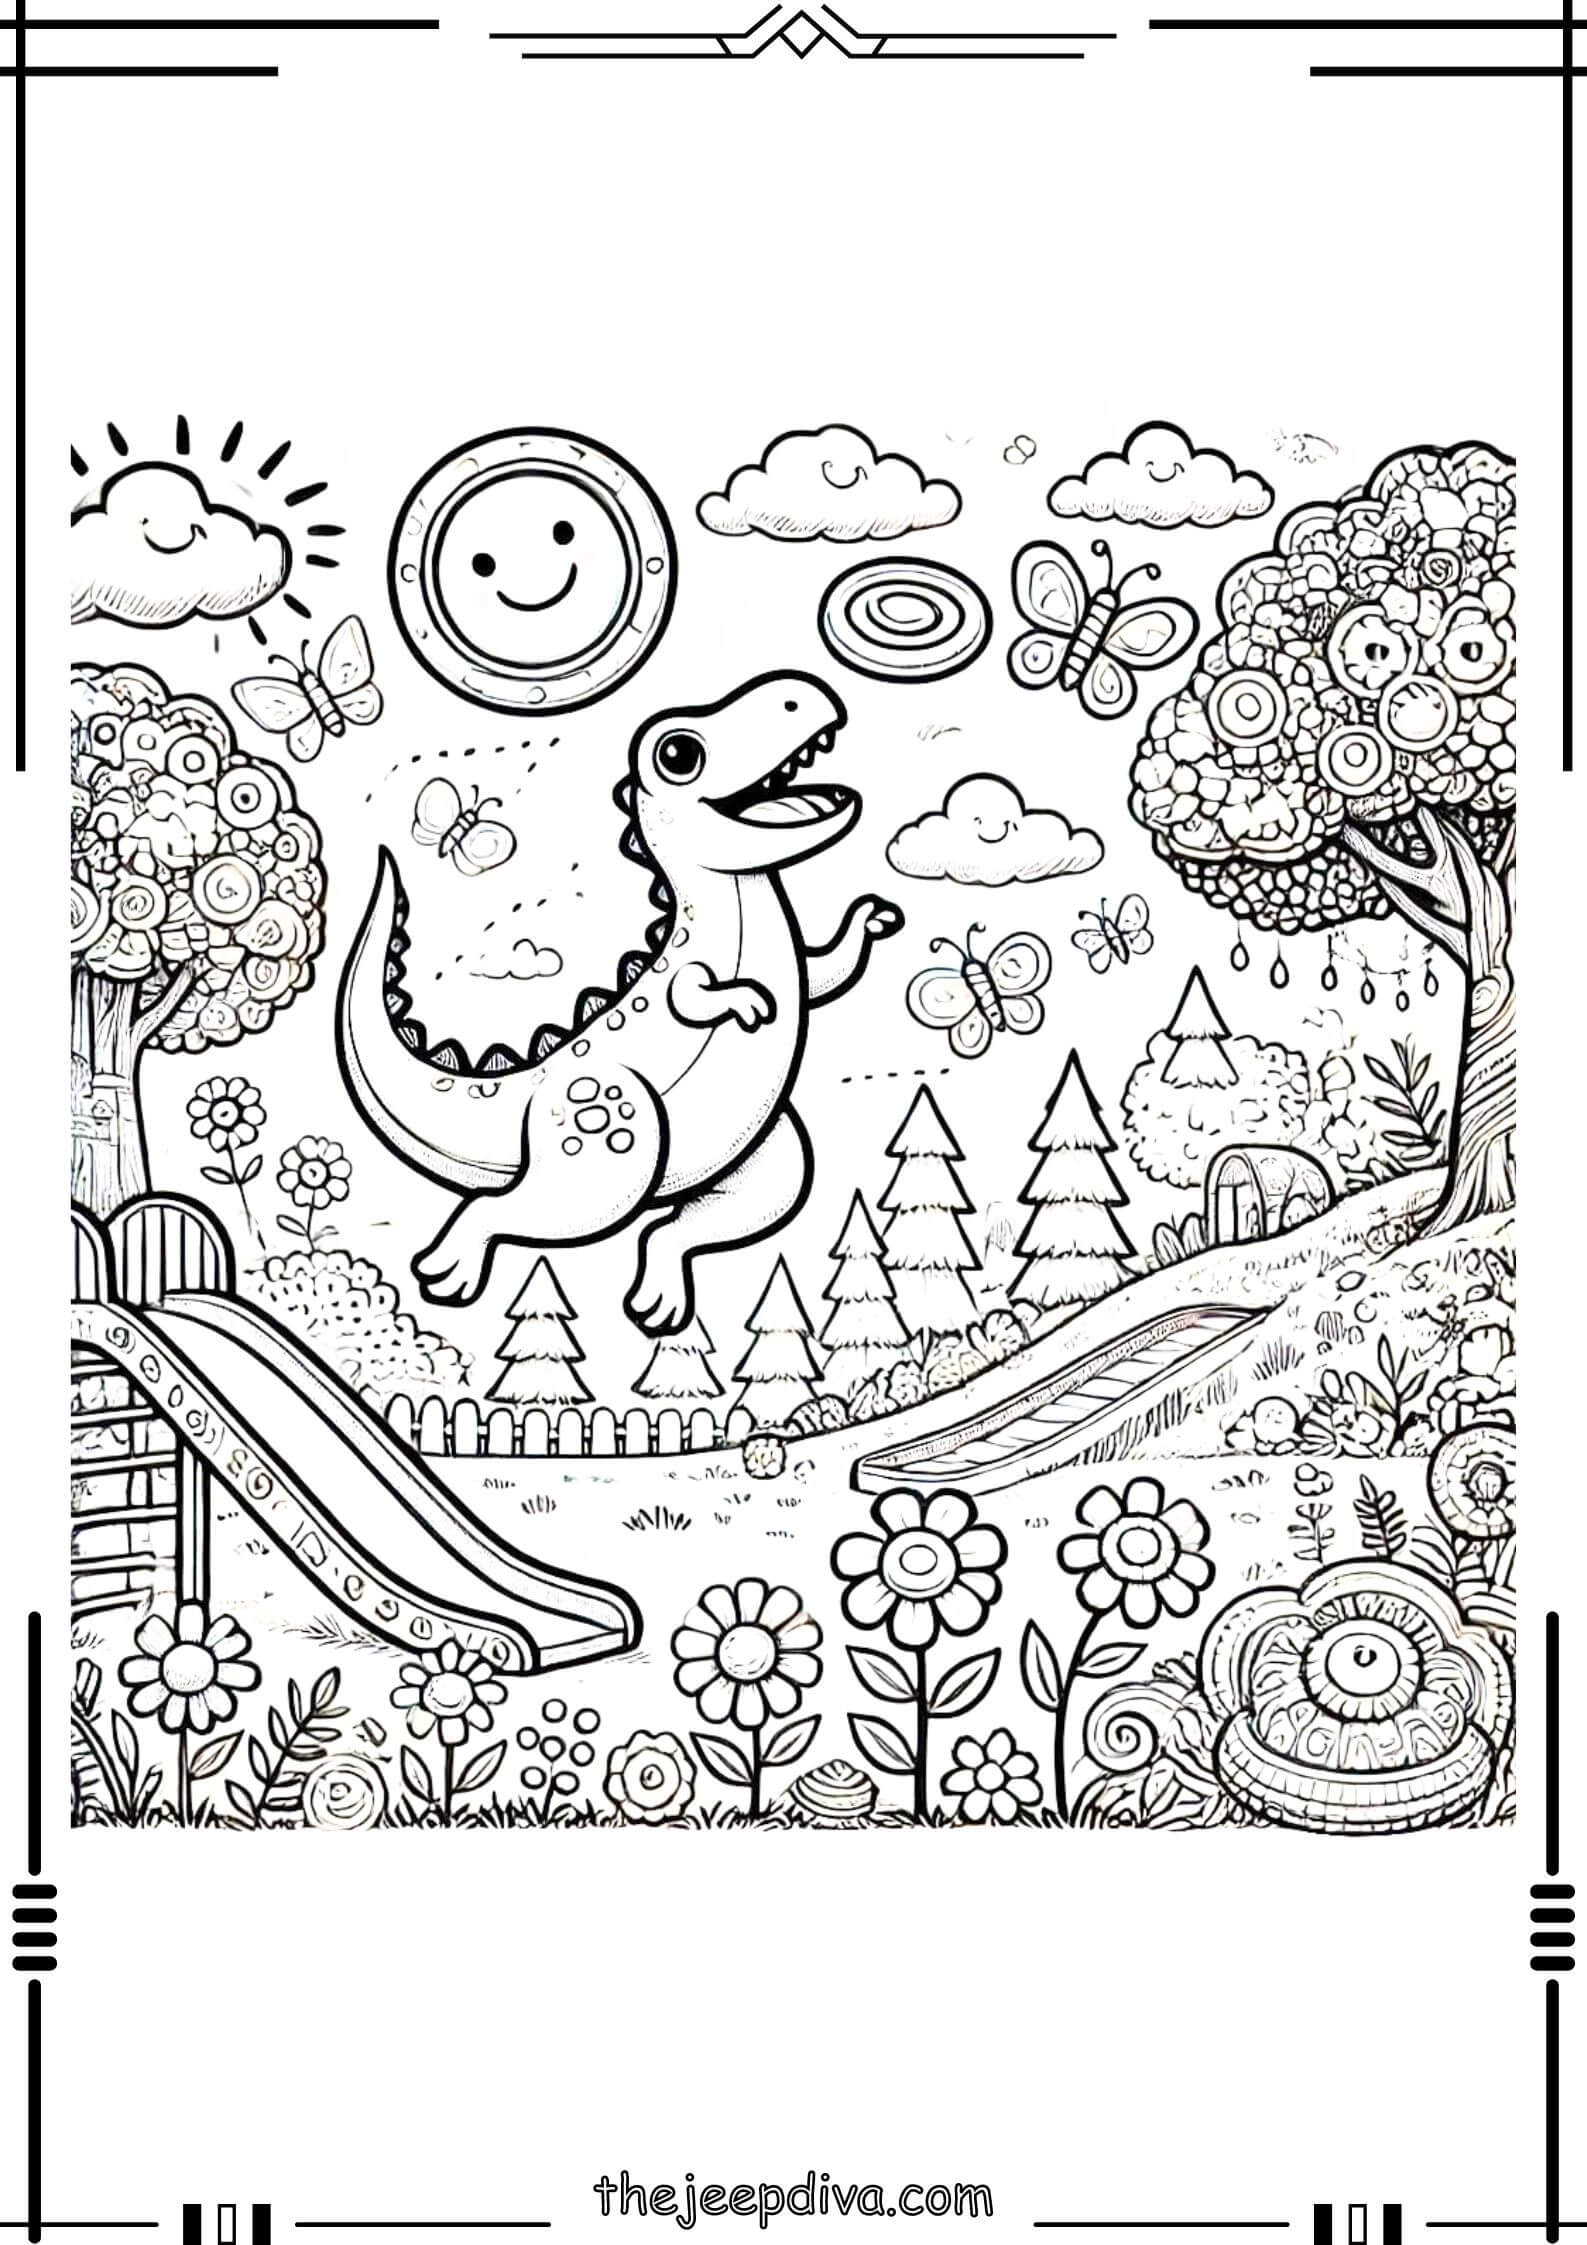 Dinosaur-Colouring-Pages-Hard-21